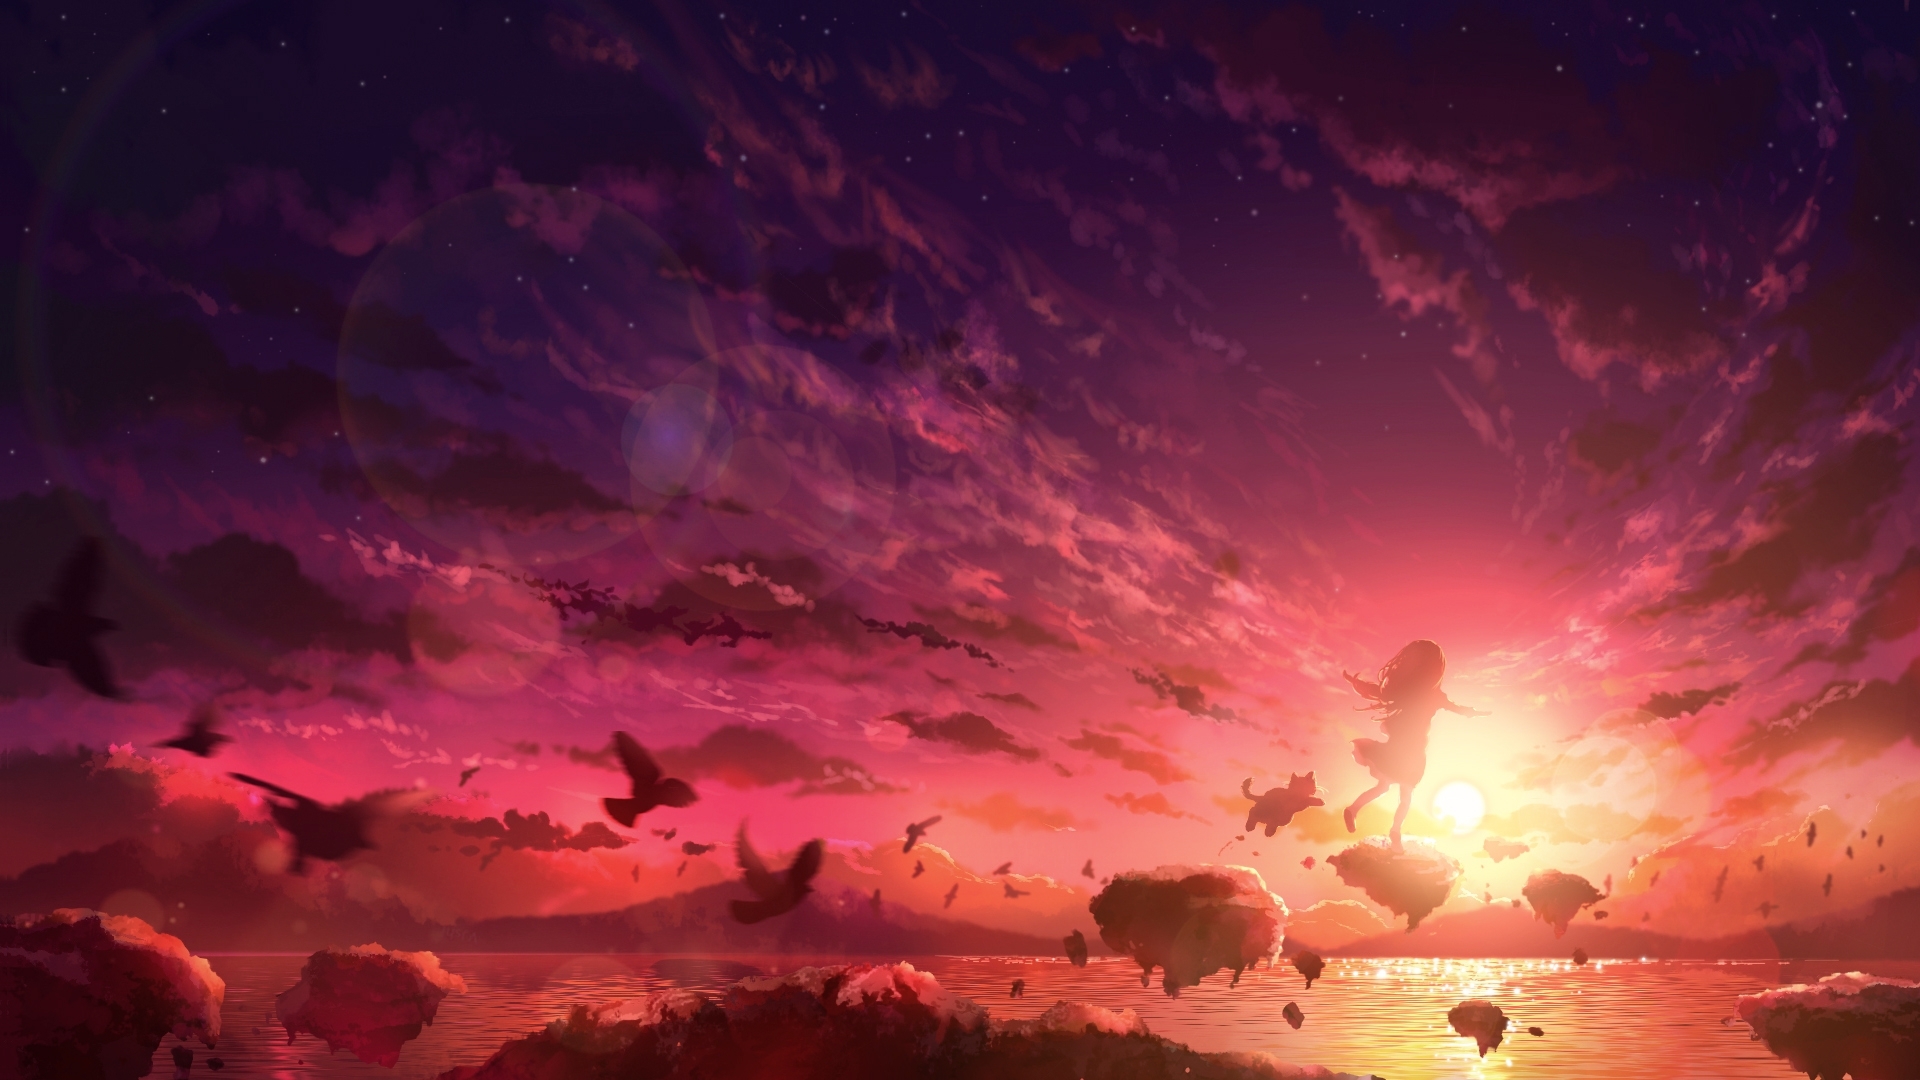 Anime Girl Into Sunset Hd Art Wallpaper Hd Artist 4k Wallpapers Images And Background